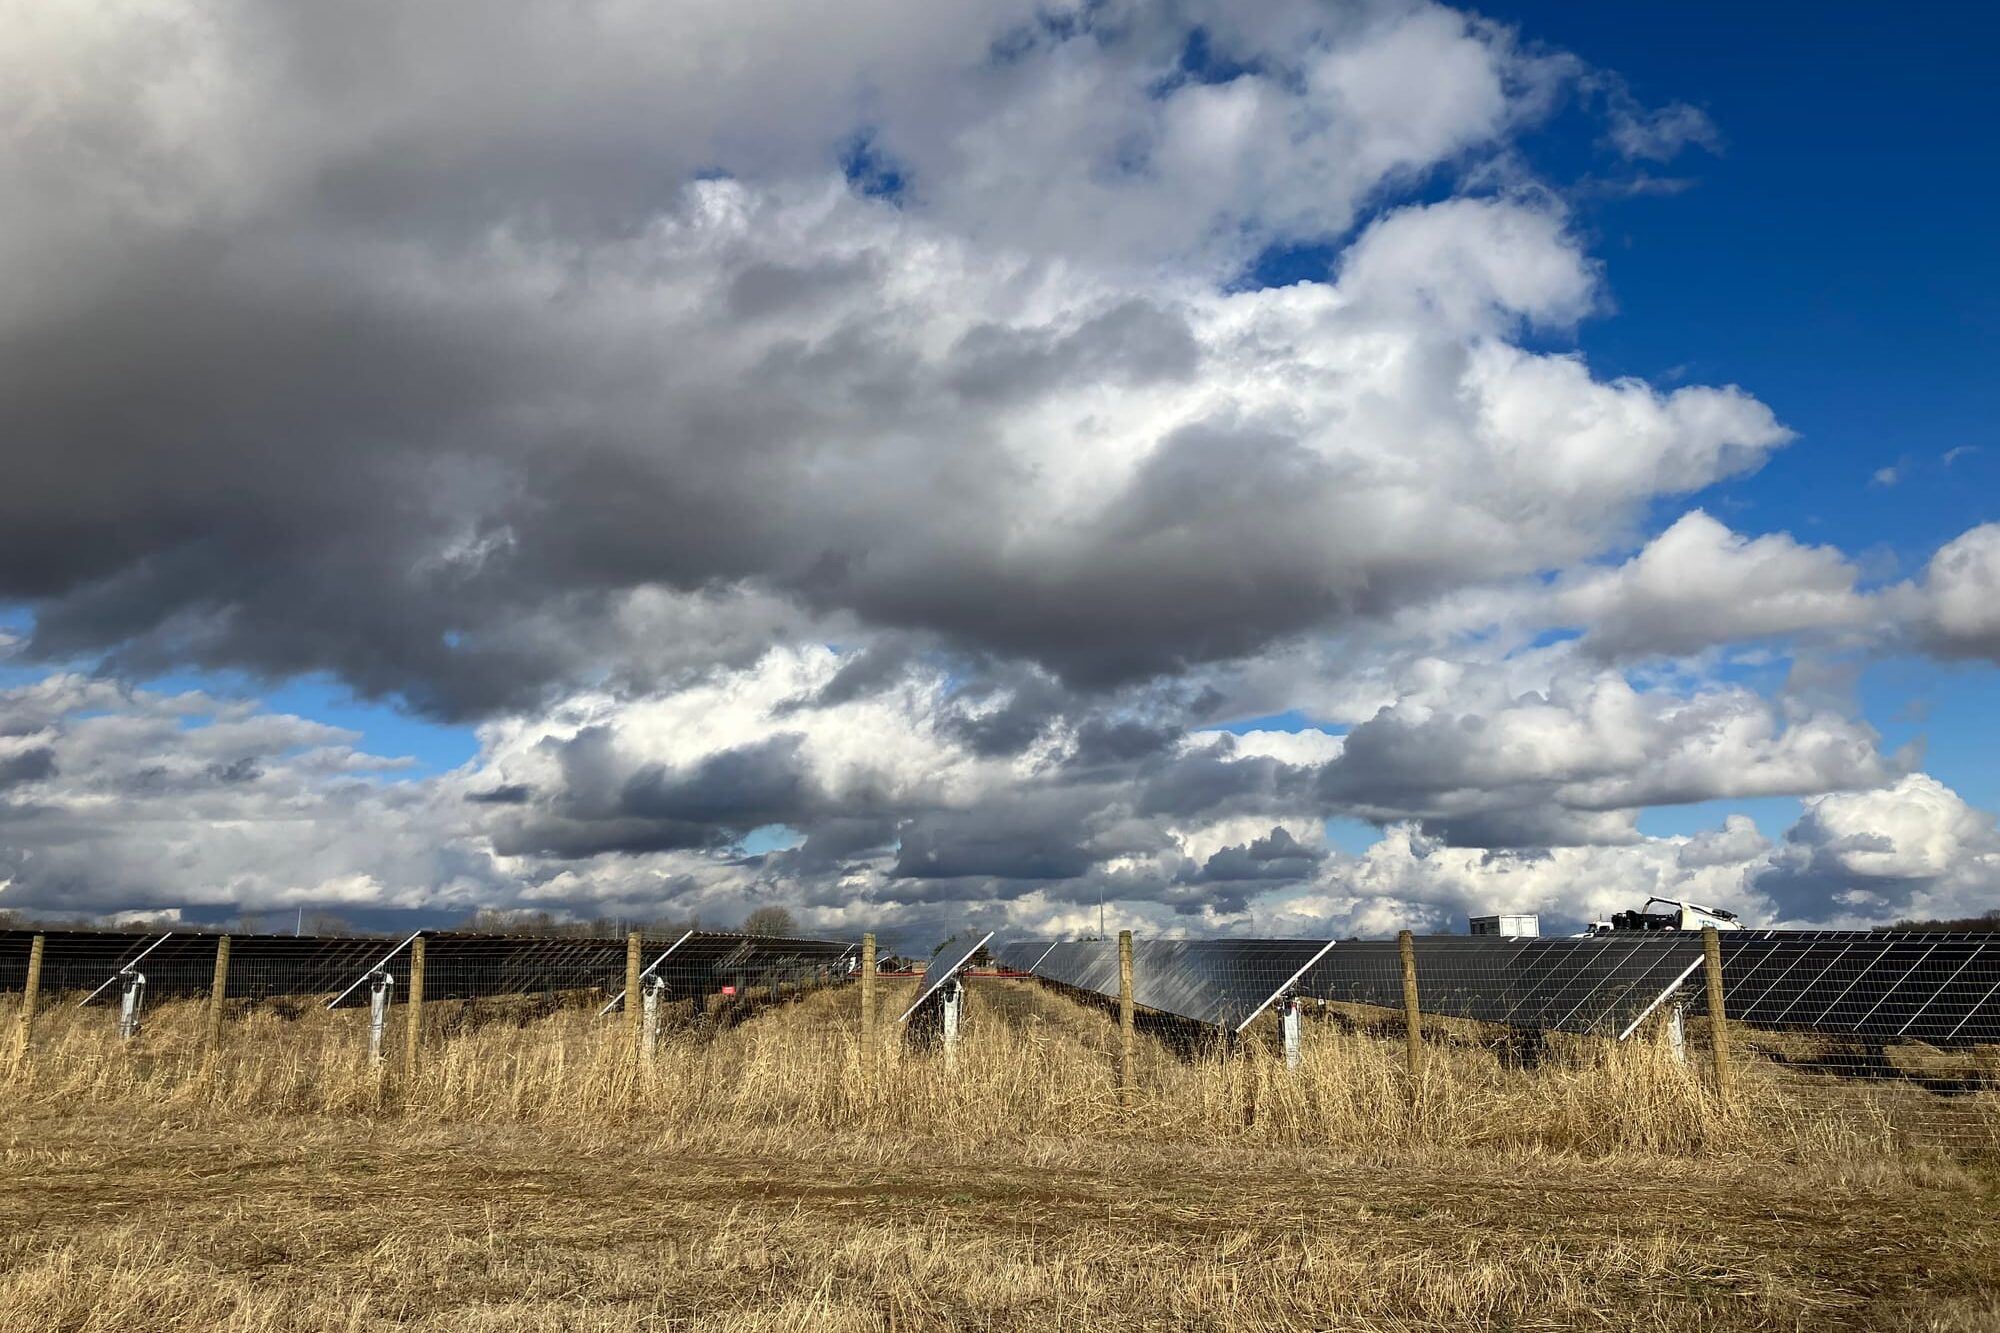 Solar paels on brown grass with a blue sky and white clouds floating overhead